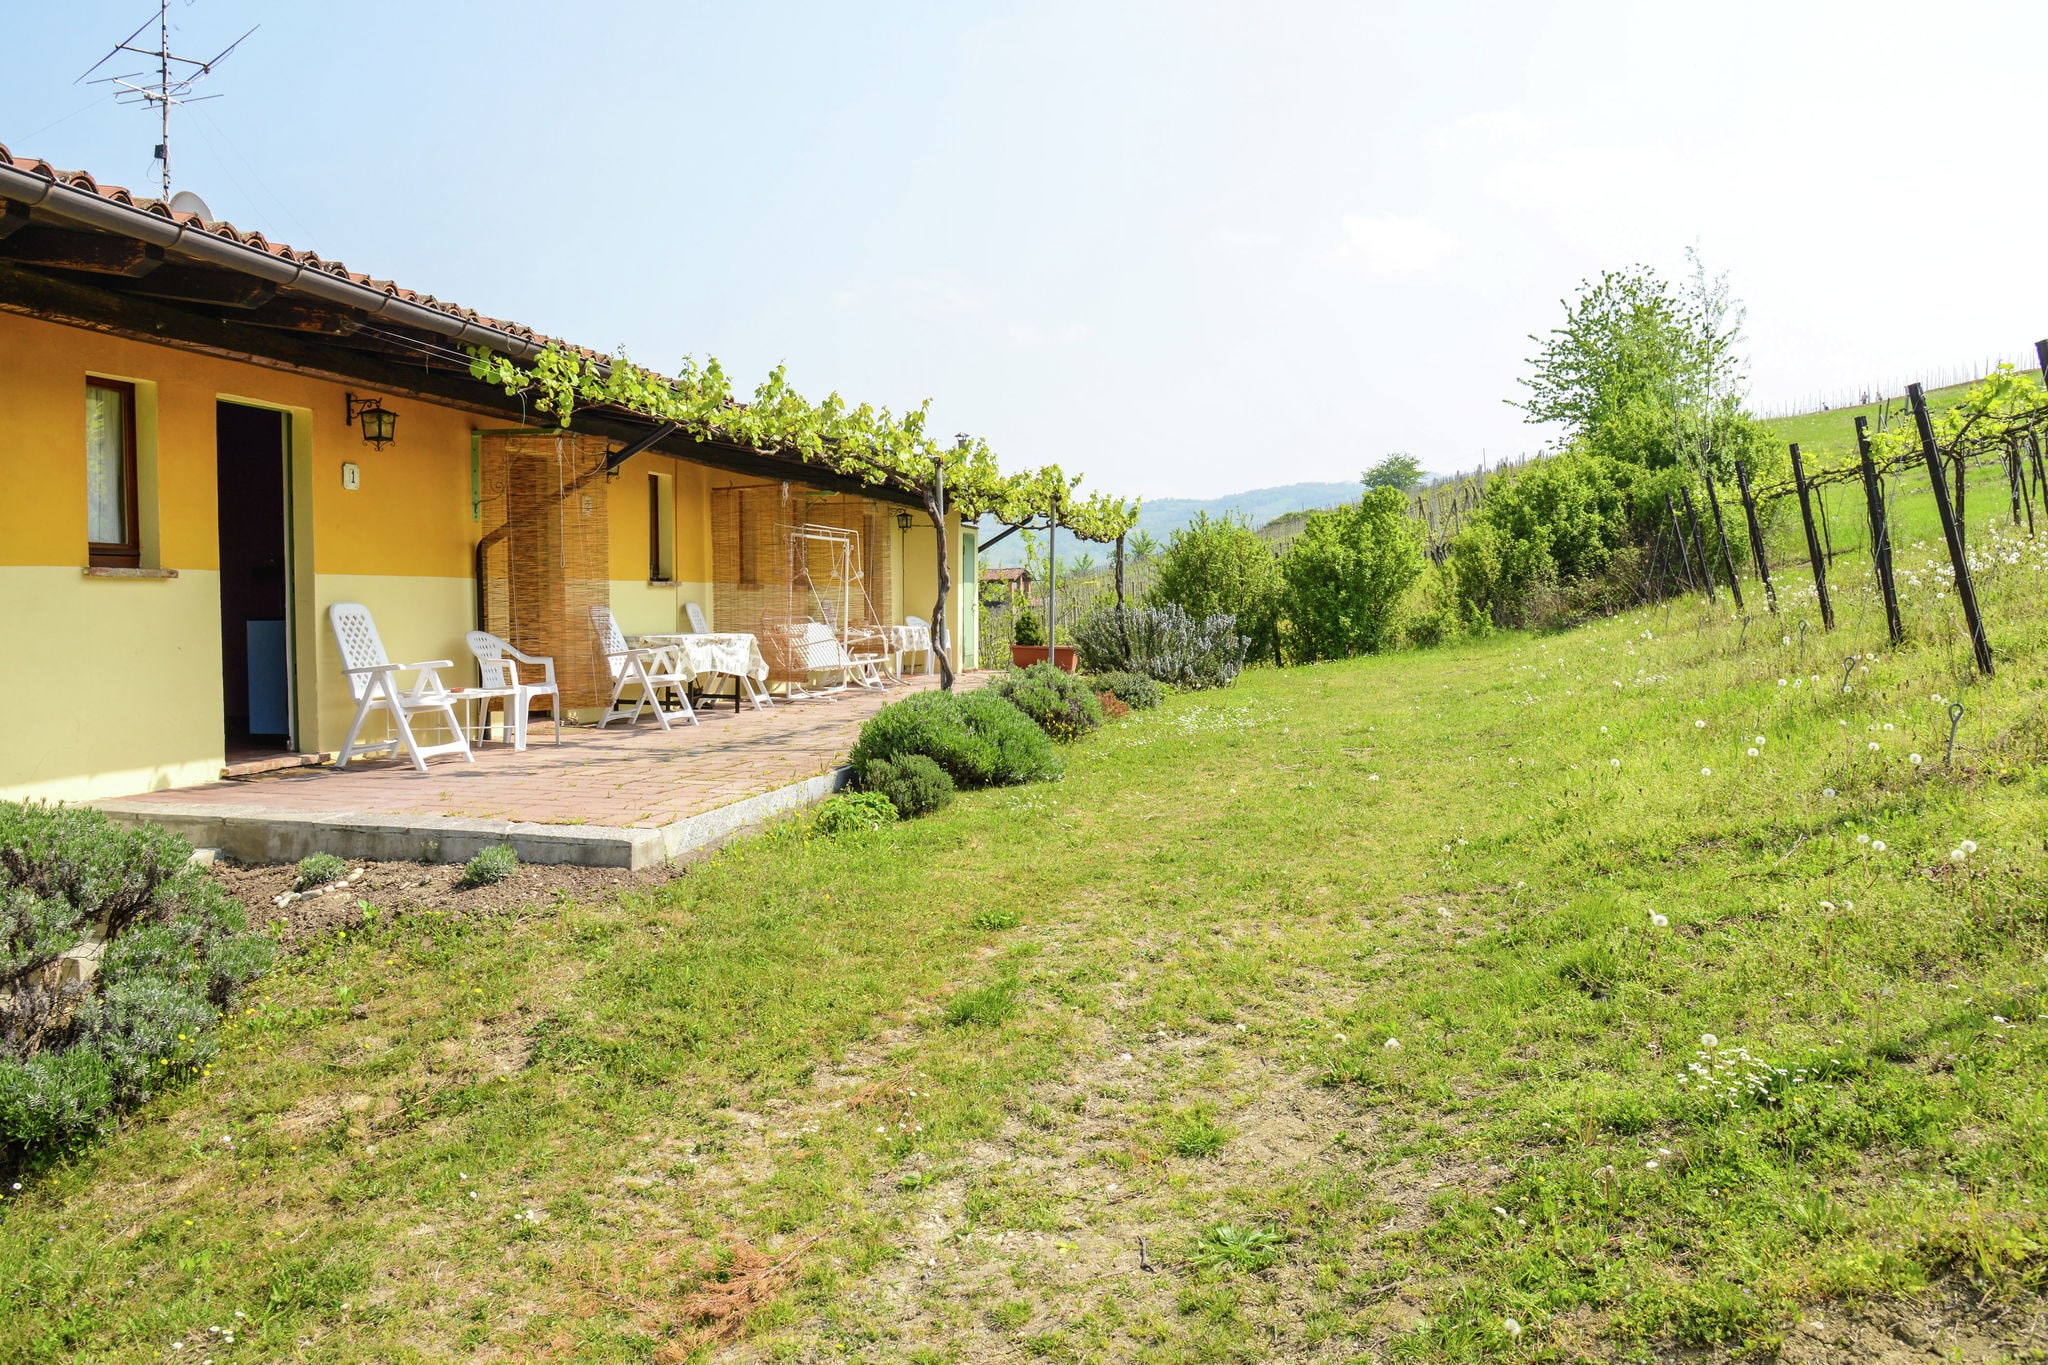 Nice and typical apartment in a farm surrounded by hills and vineyards.